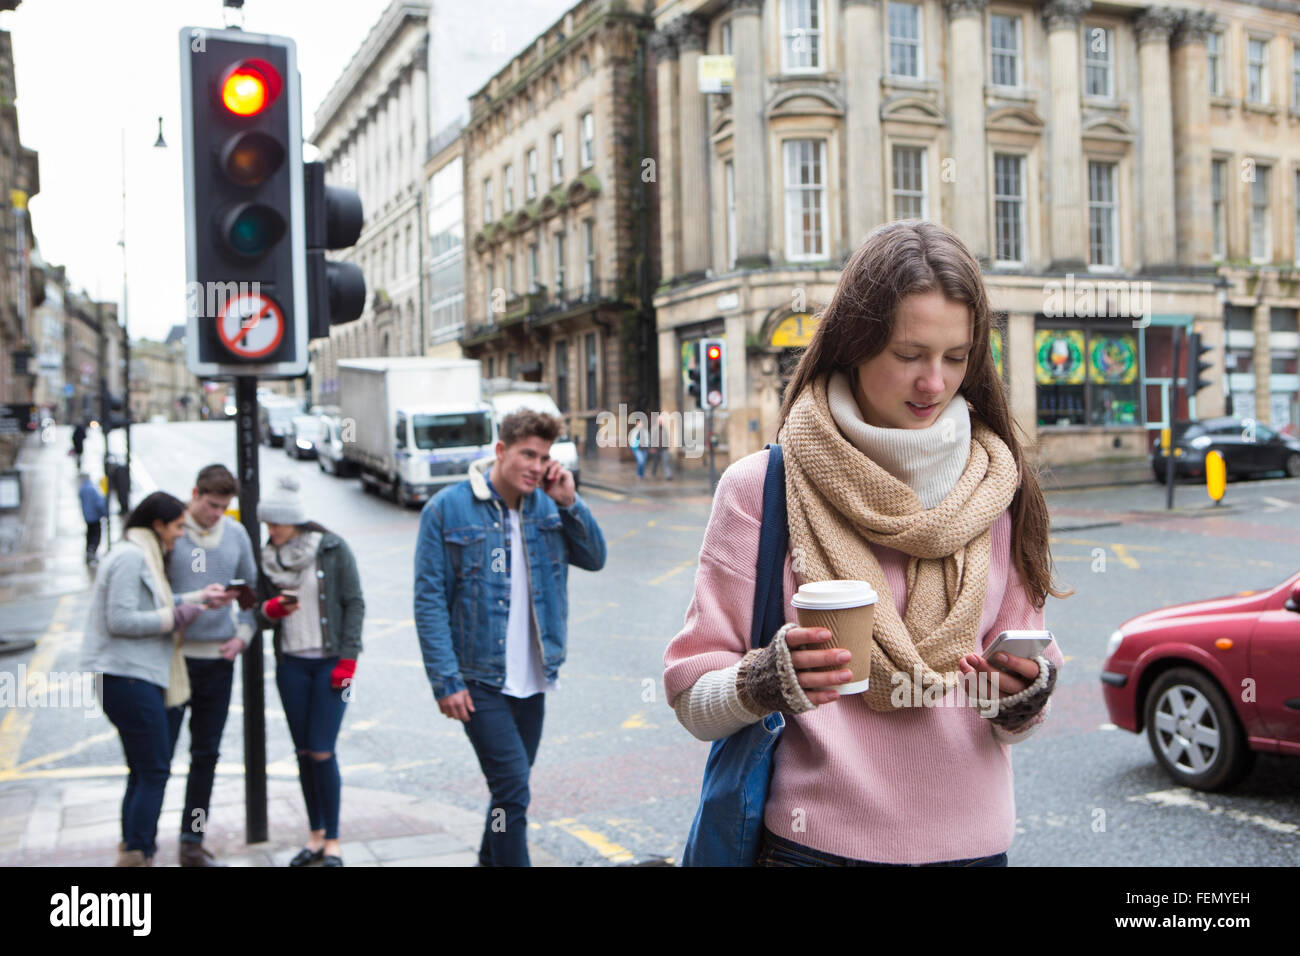 A young woman can be seen walking along a city street with a smart phone. Other young adults are in the background. Stock Photo